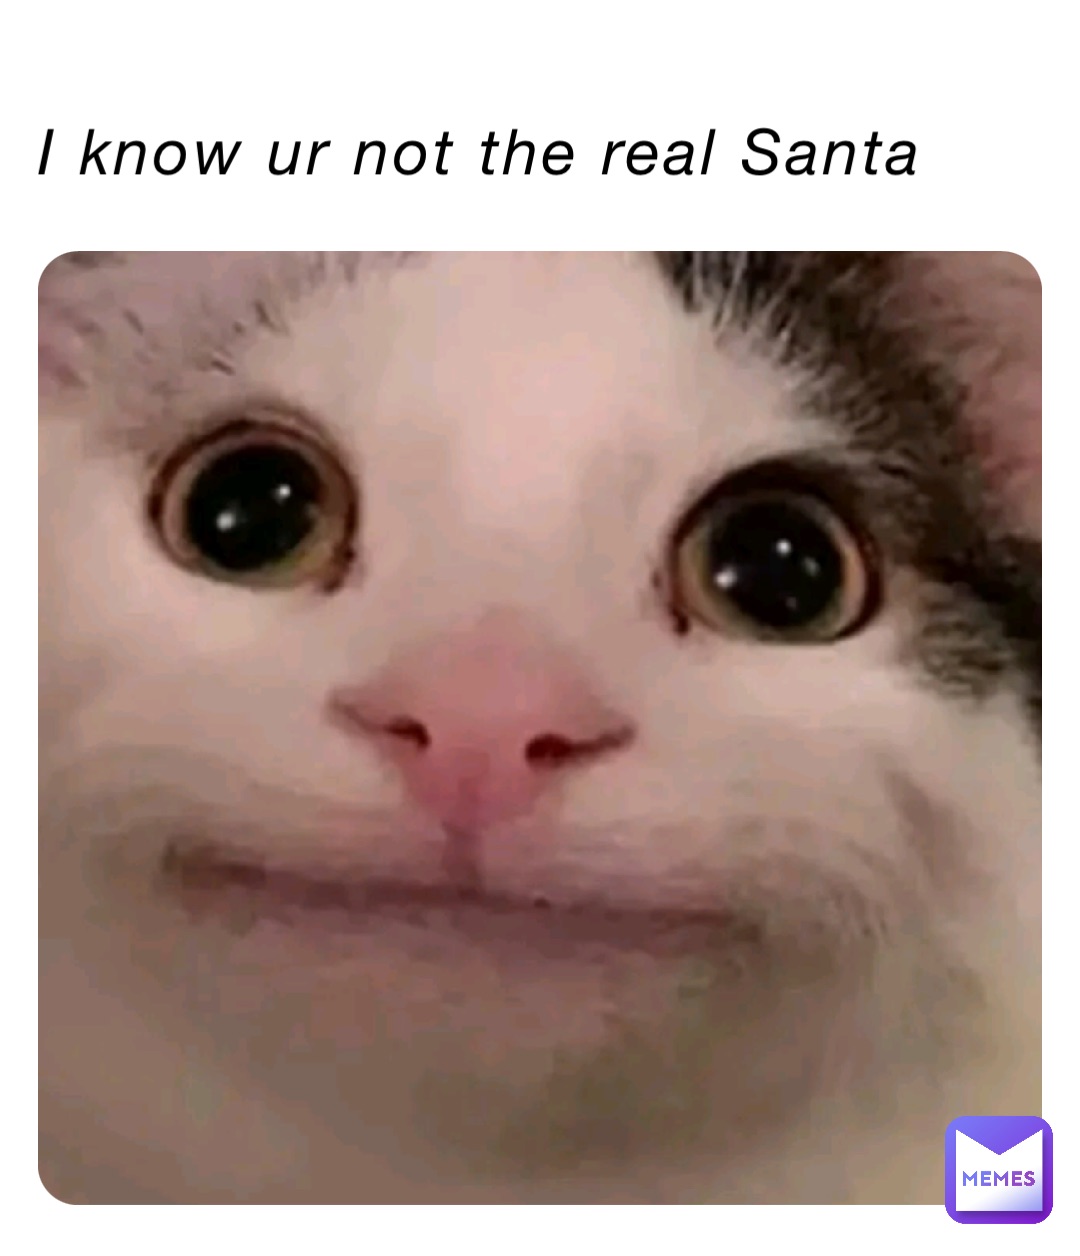 I know ur not the real Santa